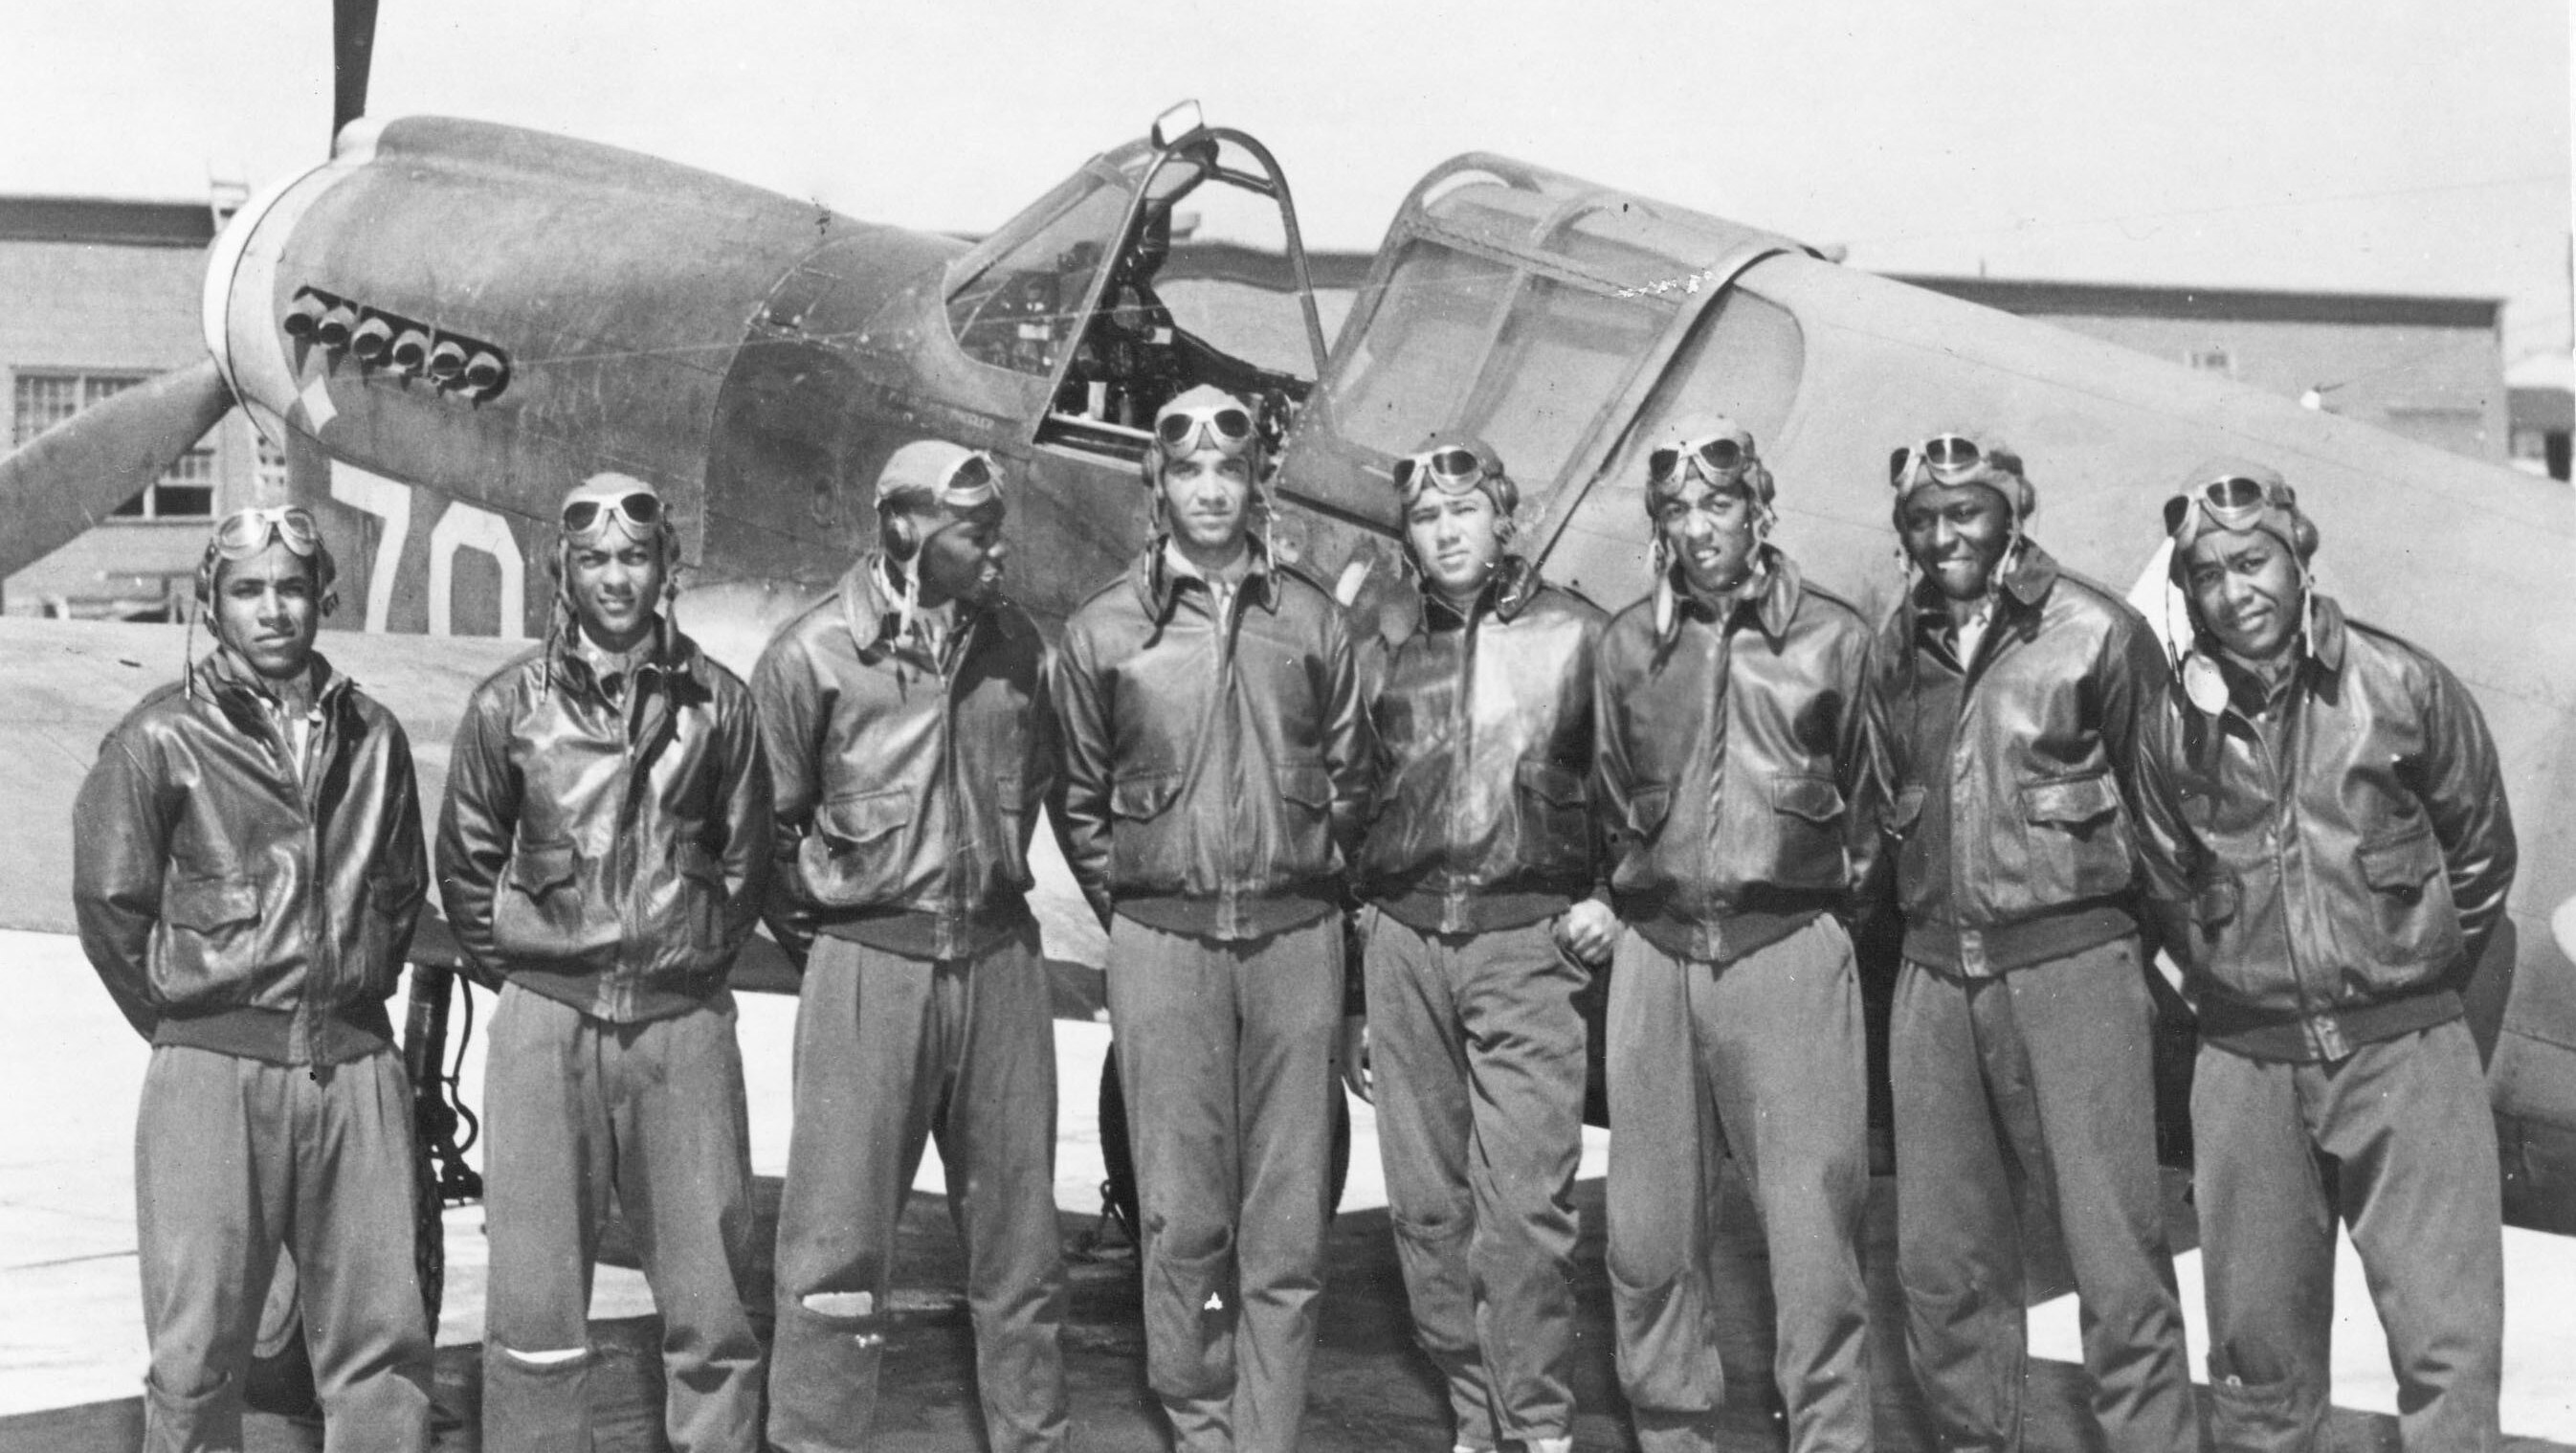 Learn About the Tuskegee Airmen with Lucasfilm’s “Fly Like Them” Initiative!